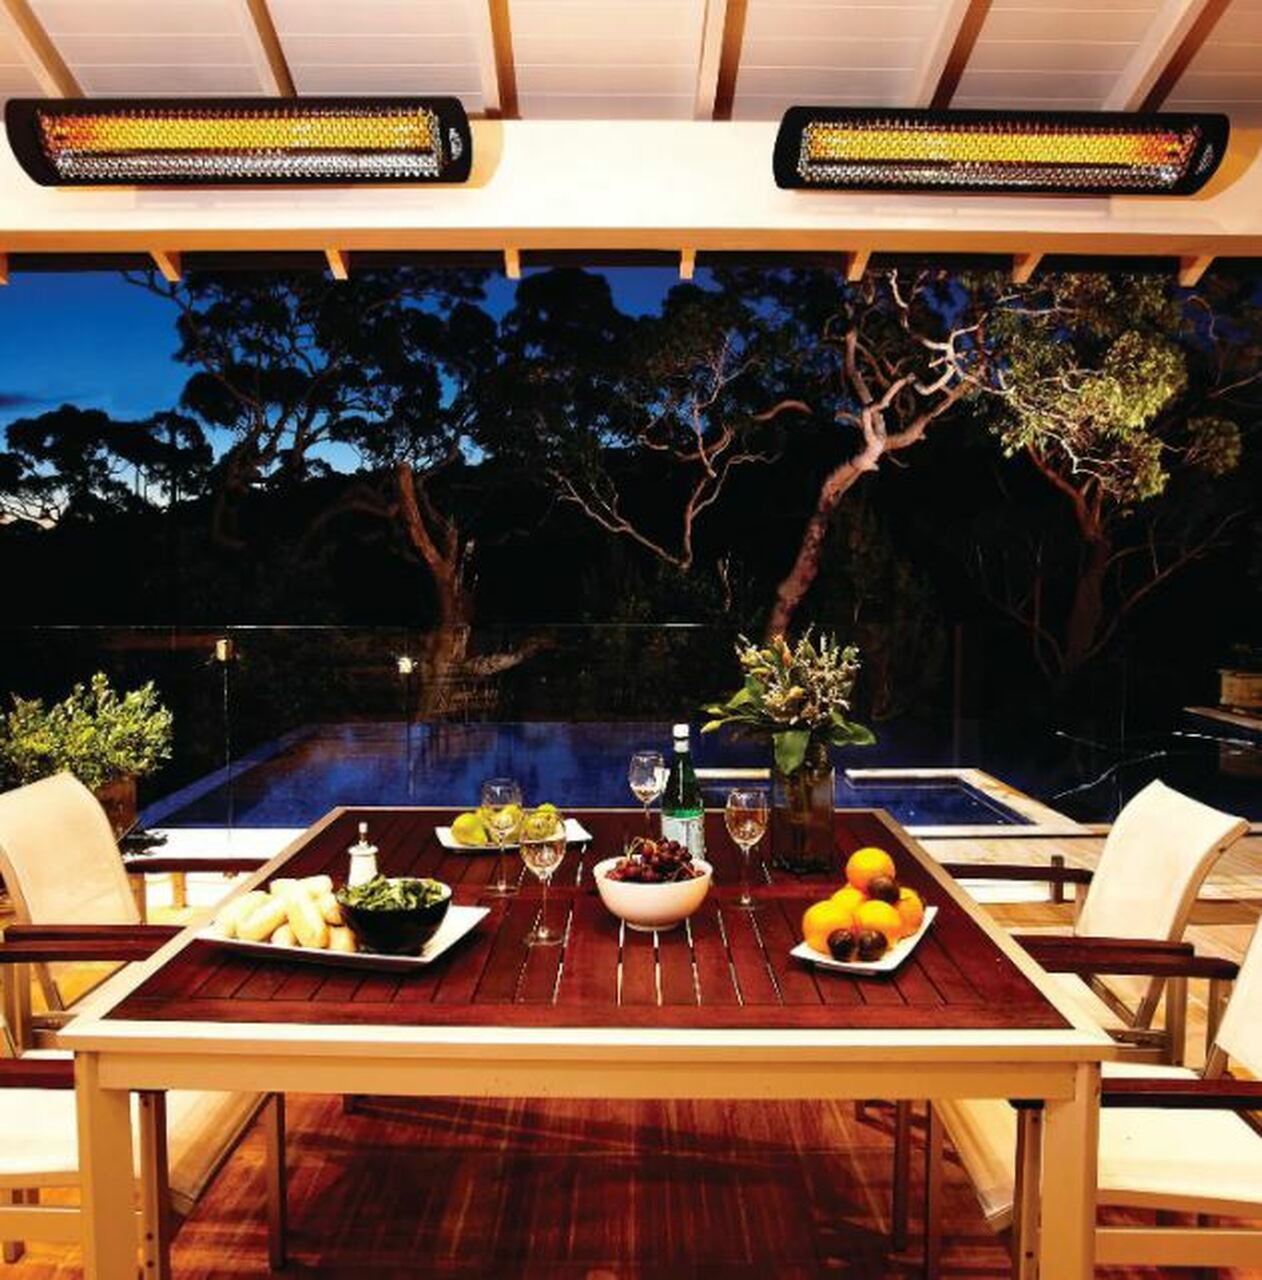 Modern patio heaters ceiling-mounted in an backyard patio gazebo with dinner setting